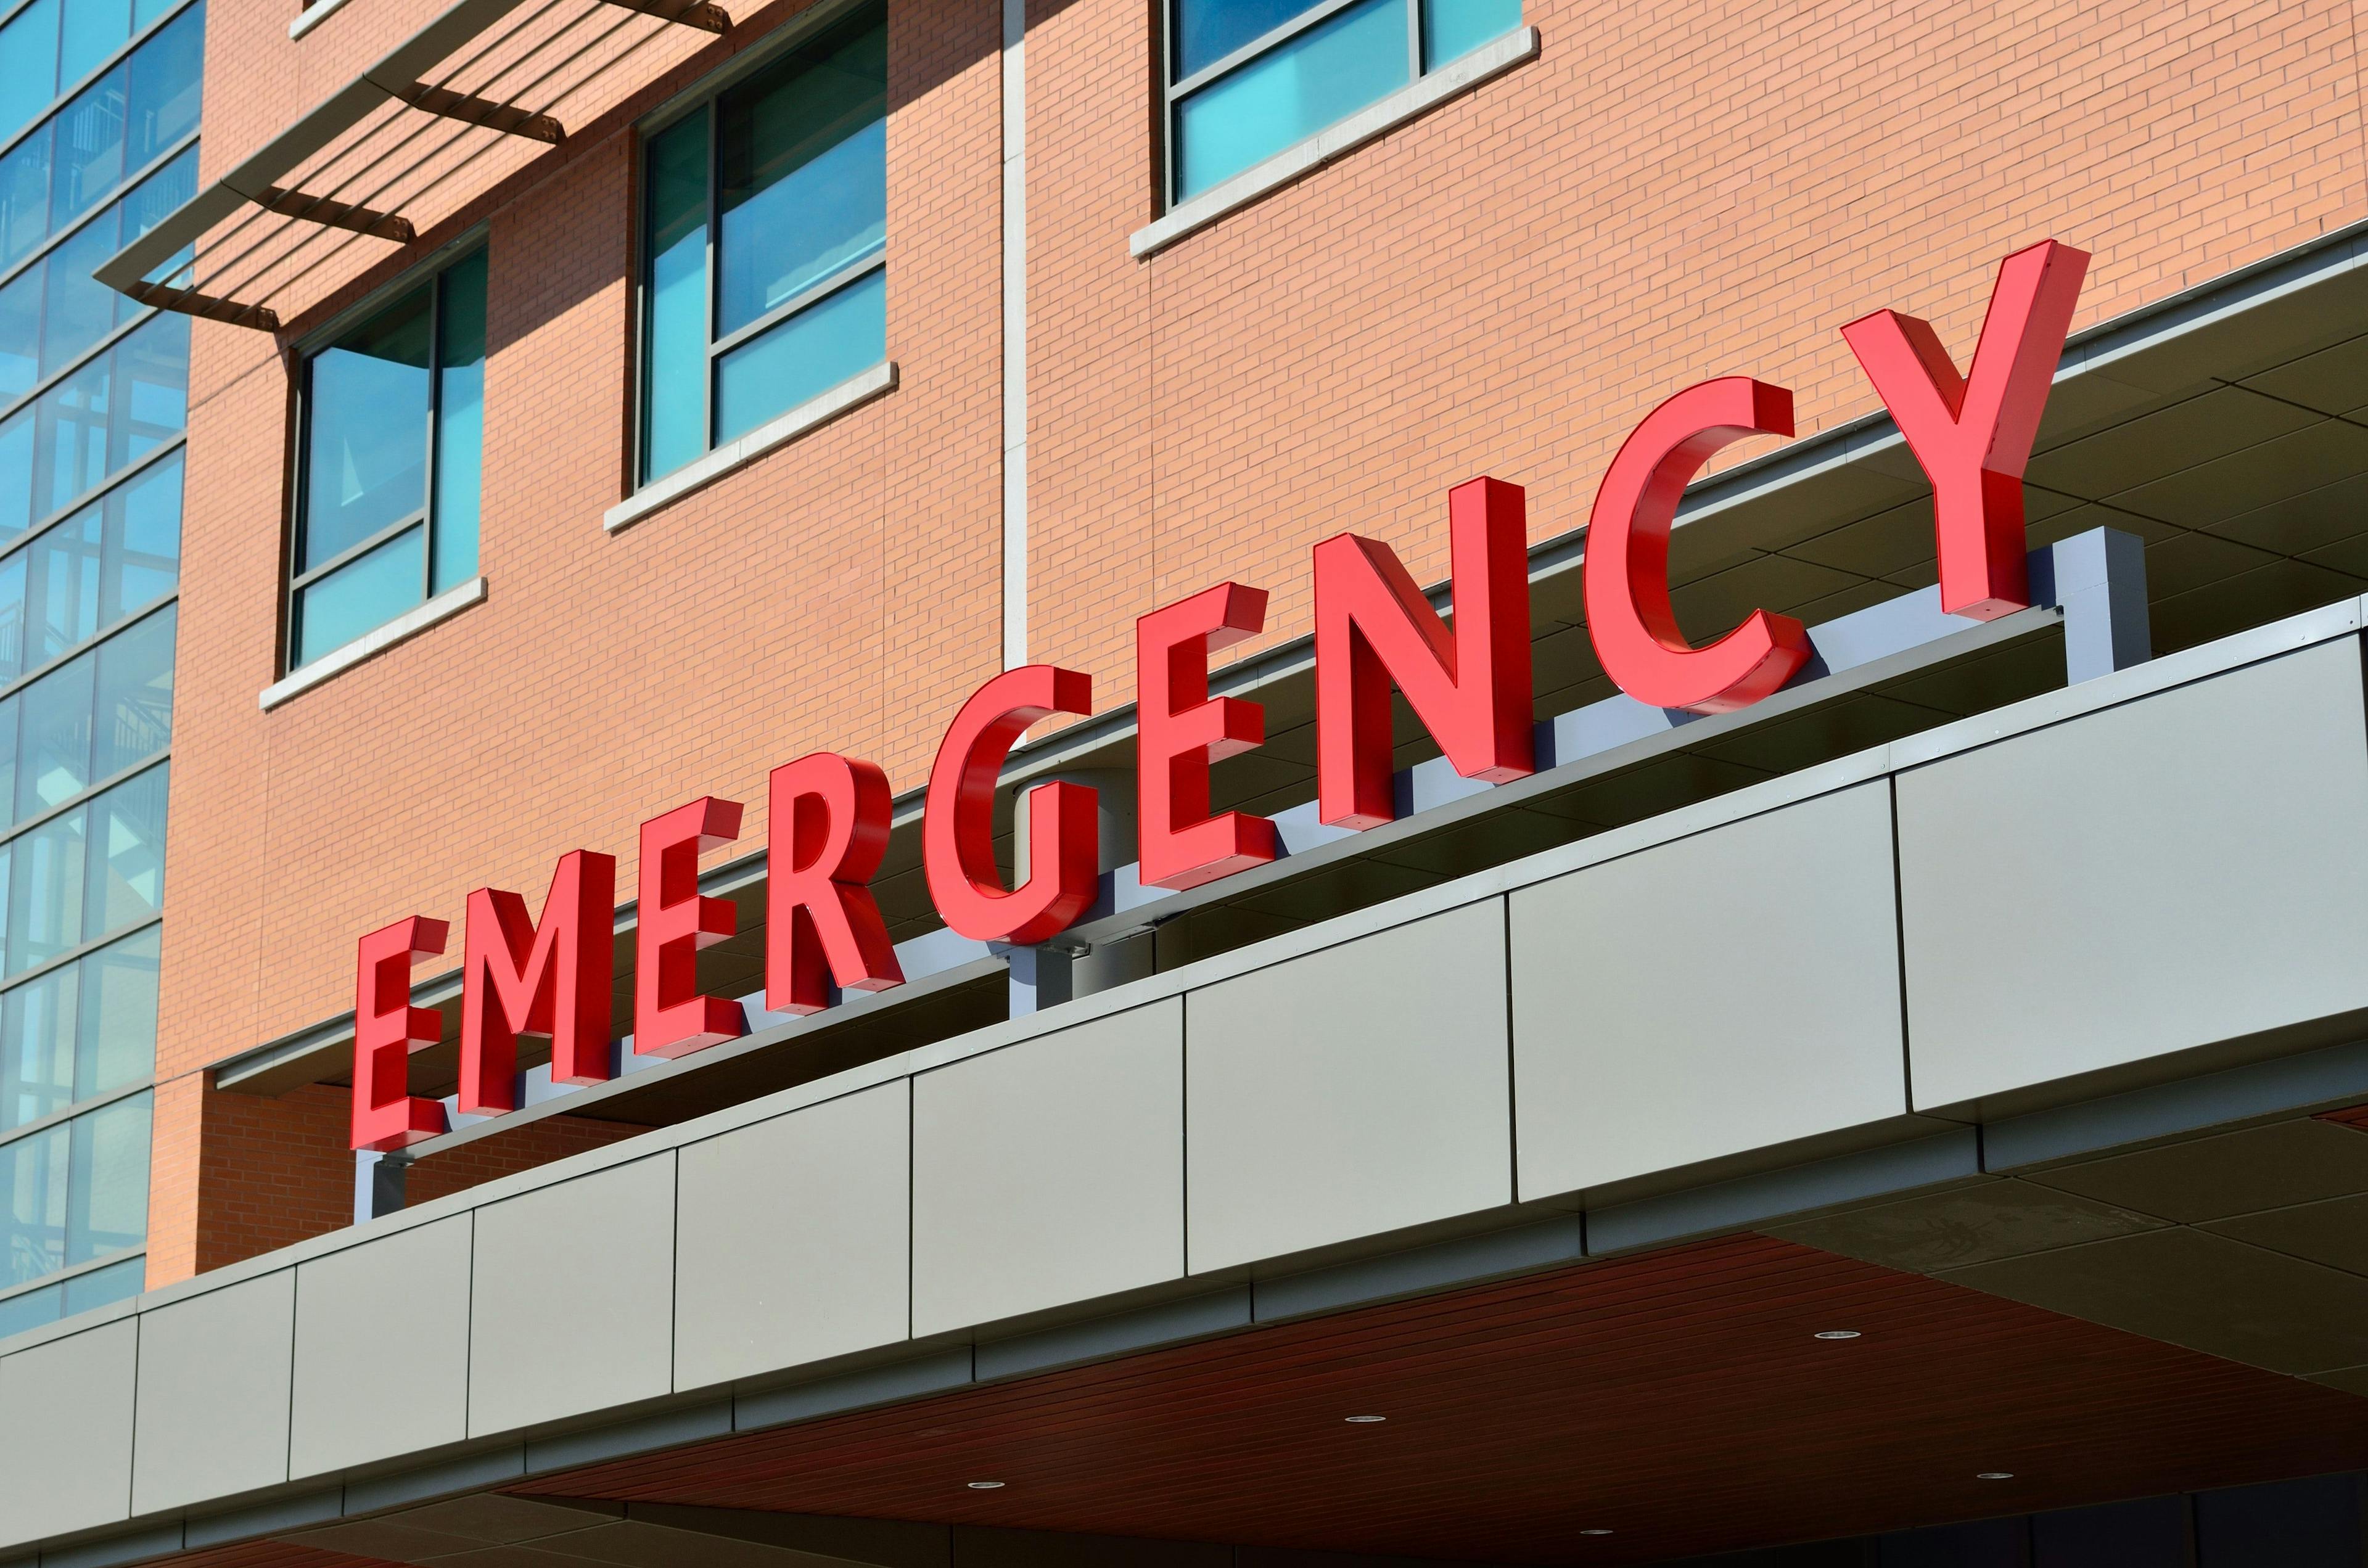 Signage in front of a hospital displaying the word "EMERGENCY" | Credit: Pixabay